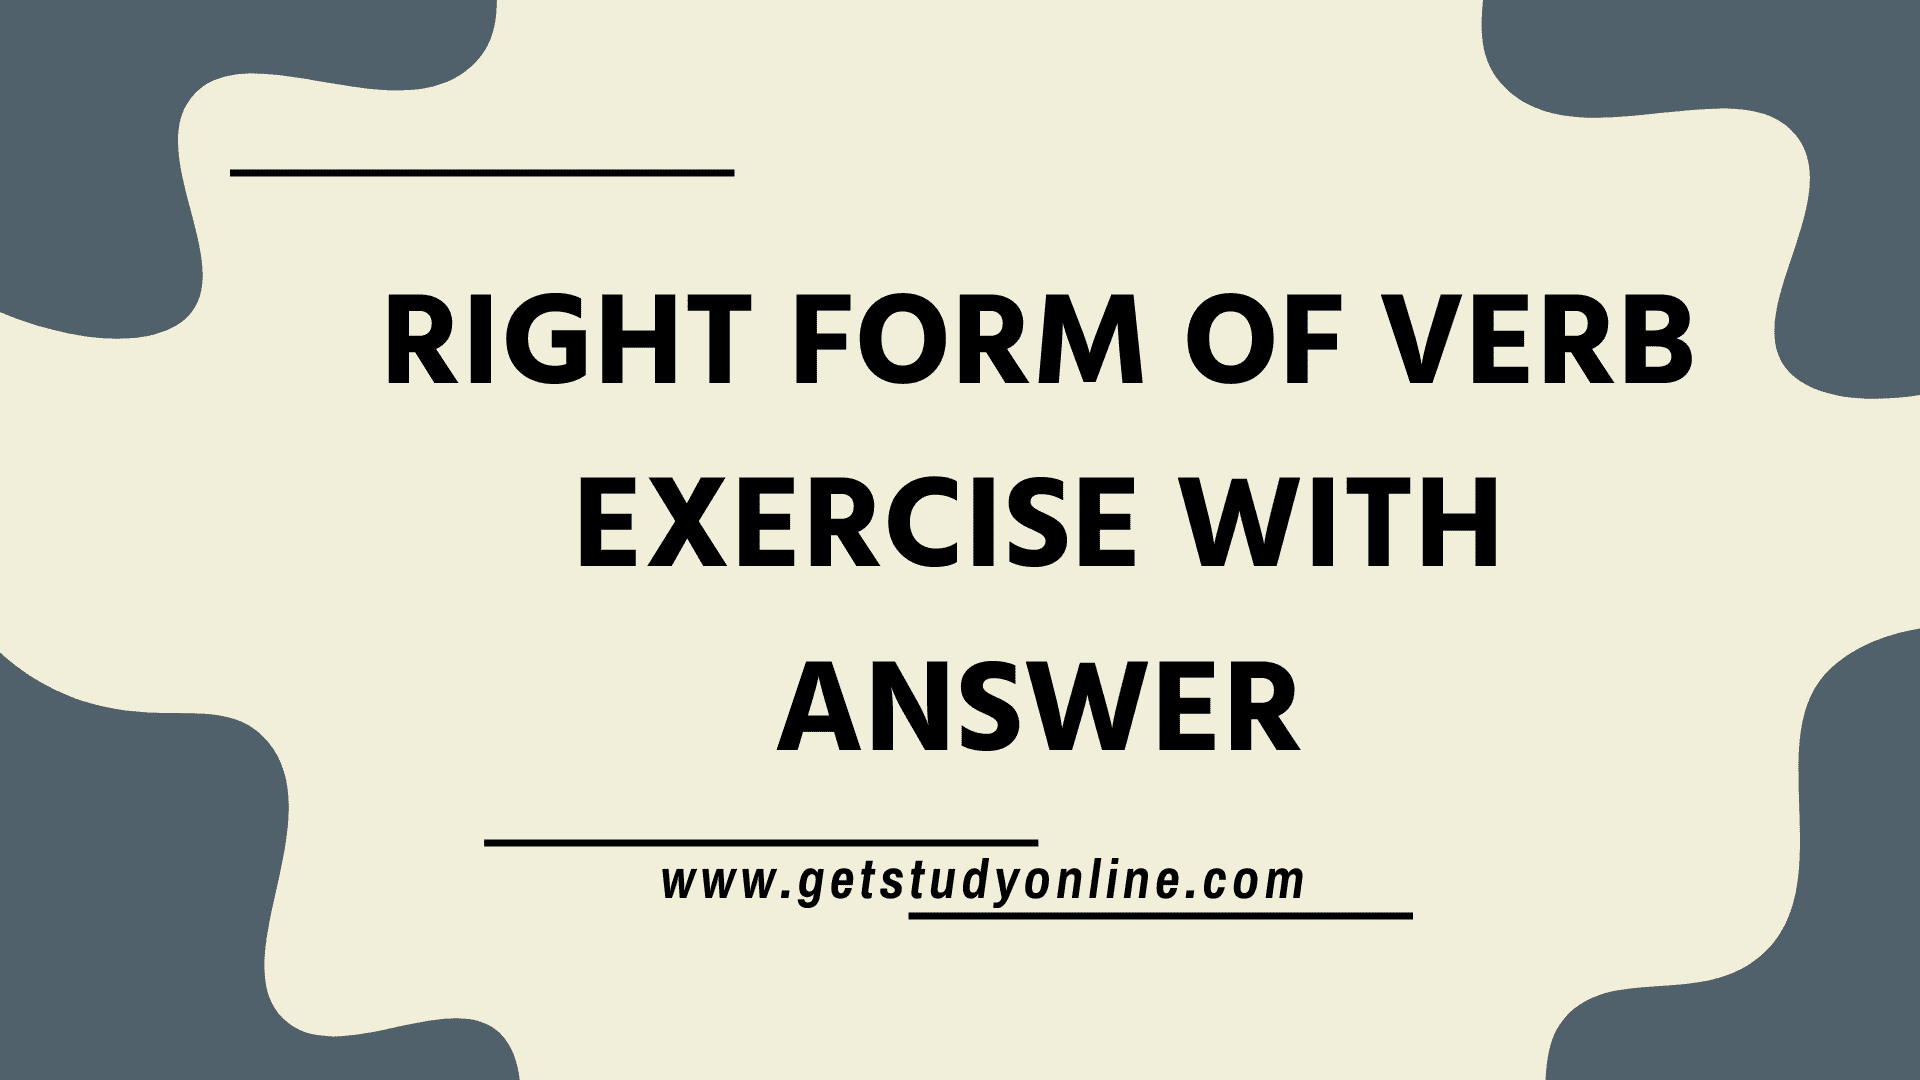 50 Right Form of Verb Exercise With Answer